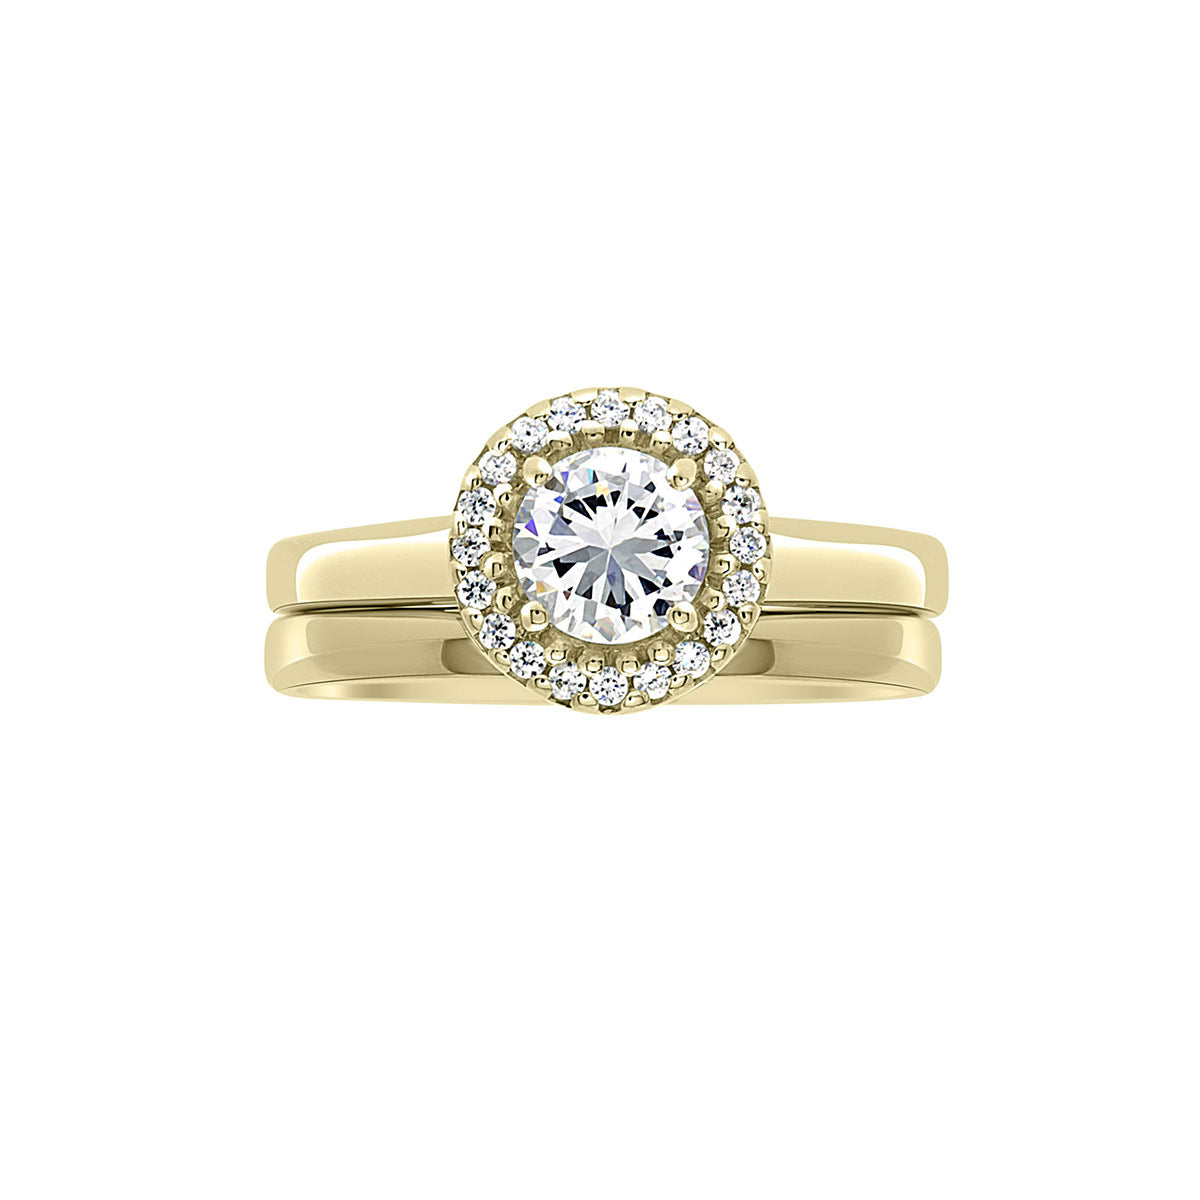 Round Vintage Engagement Ring in yellow gold,  a horizontal position against a white background. Also featuring a plain matching wedding band